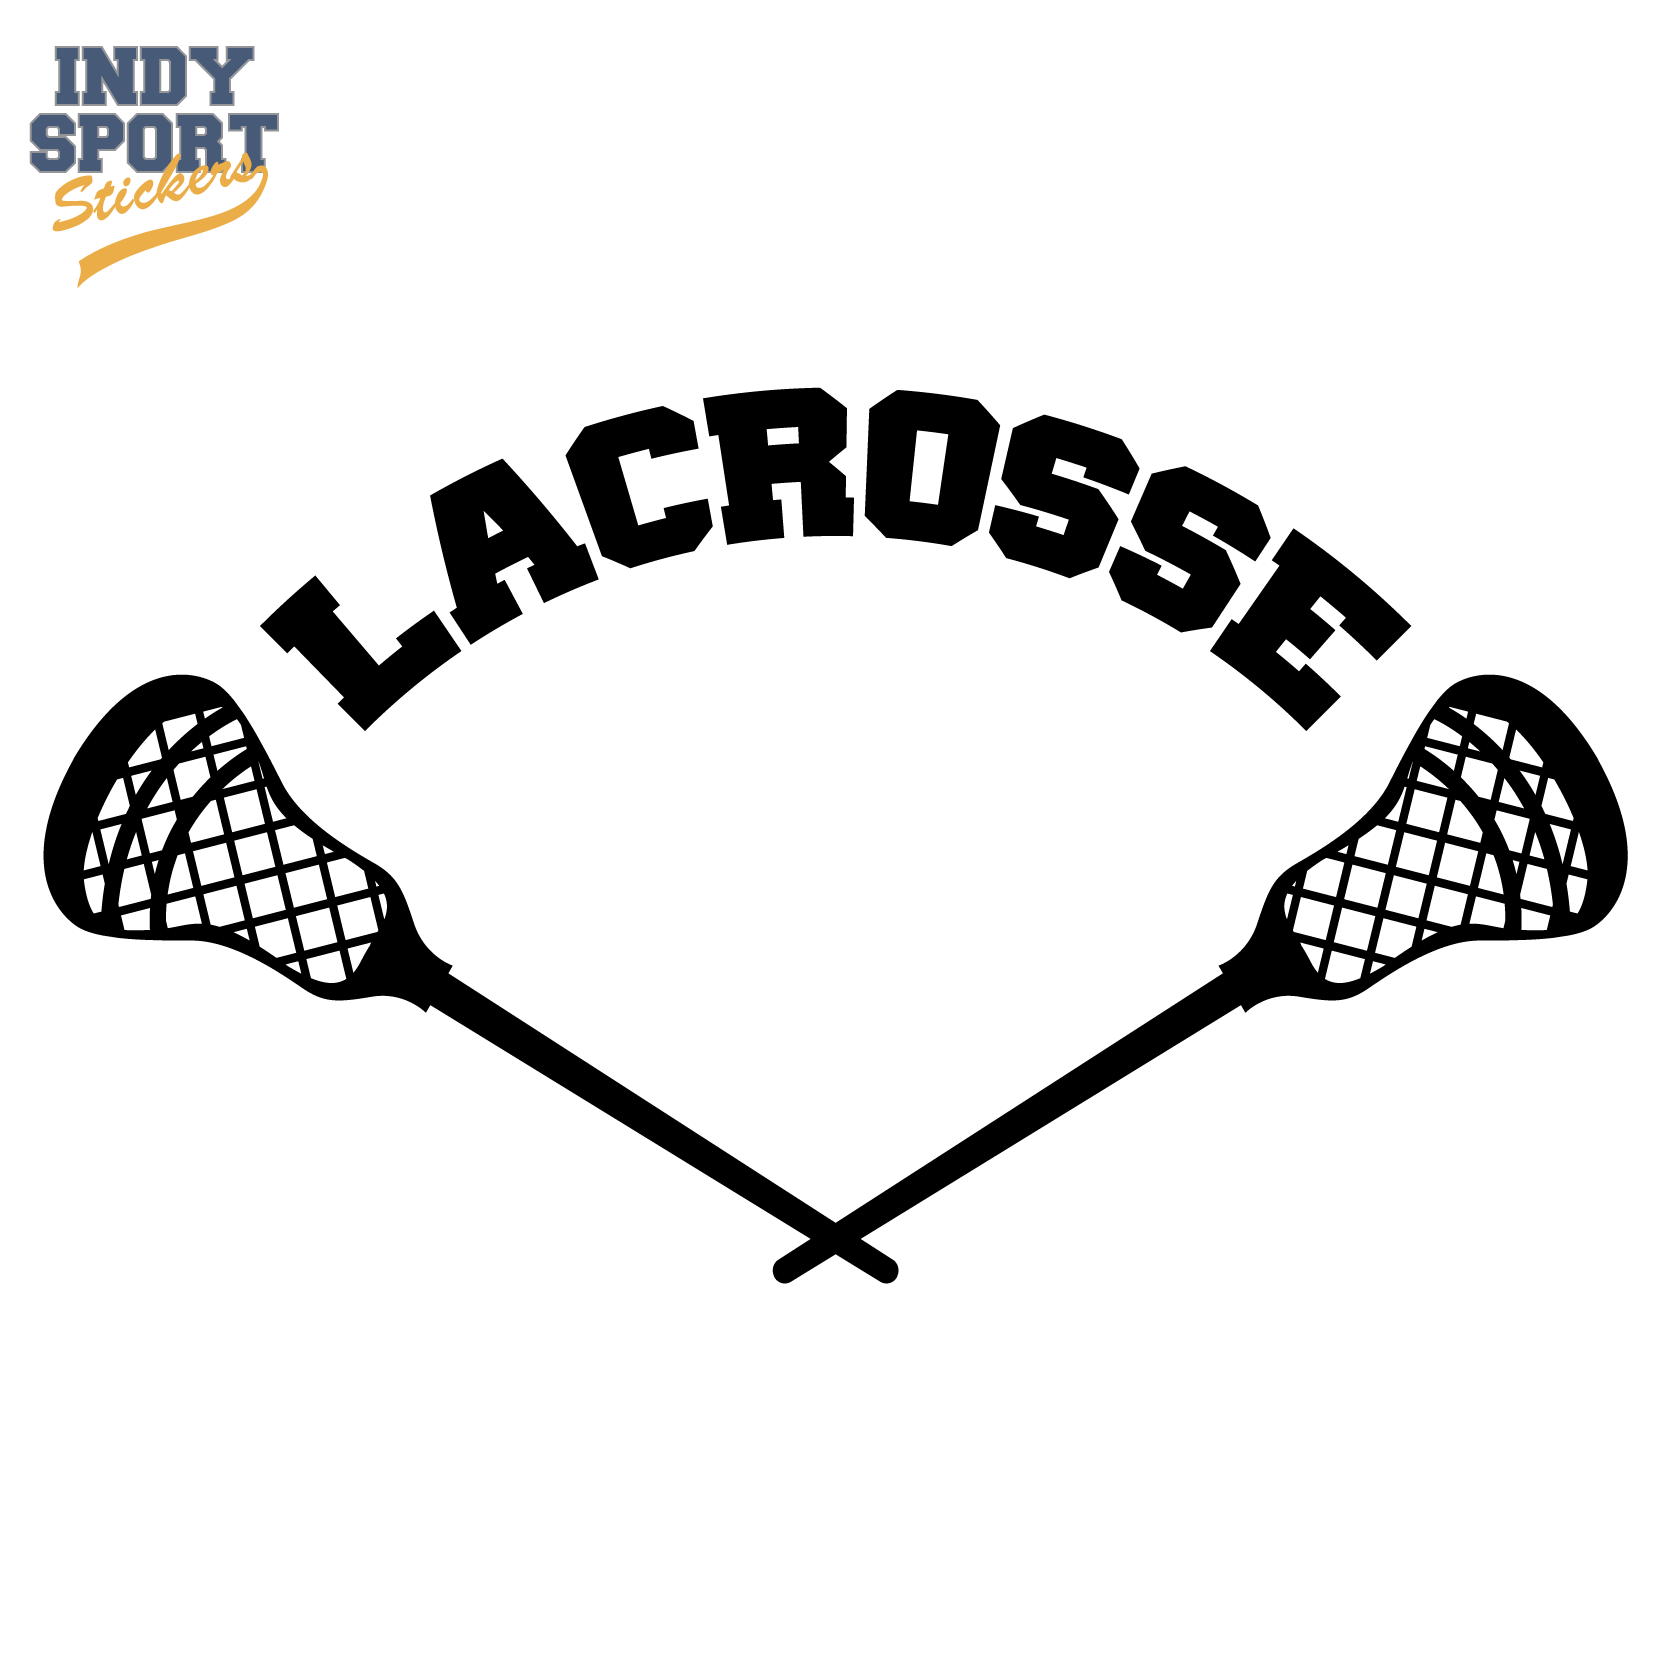 Lacrosse Sticks Crossed with Ball - Indy Sport Stickers